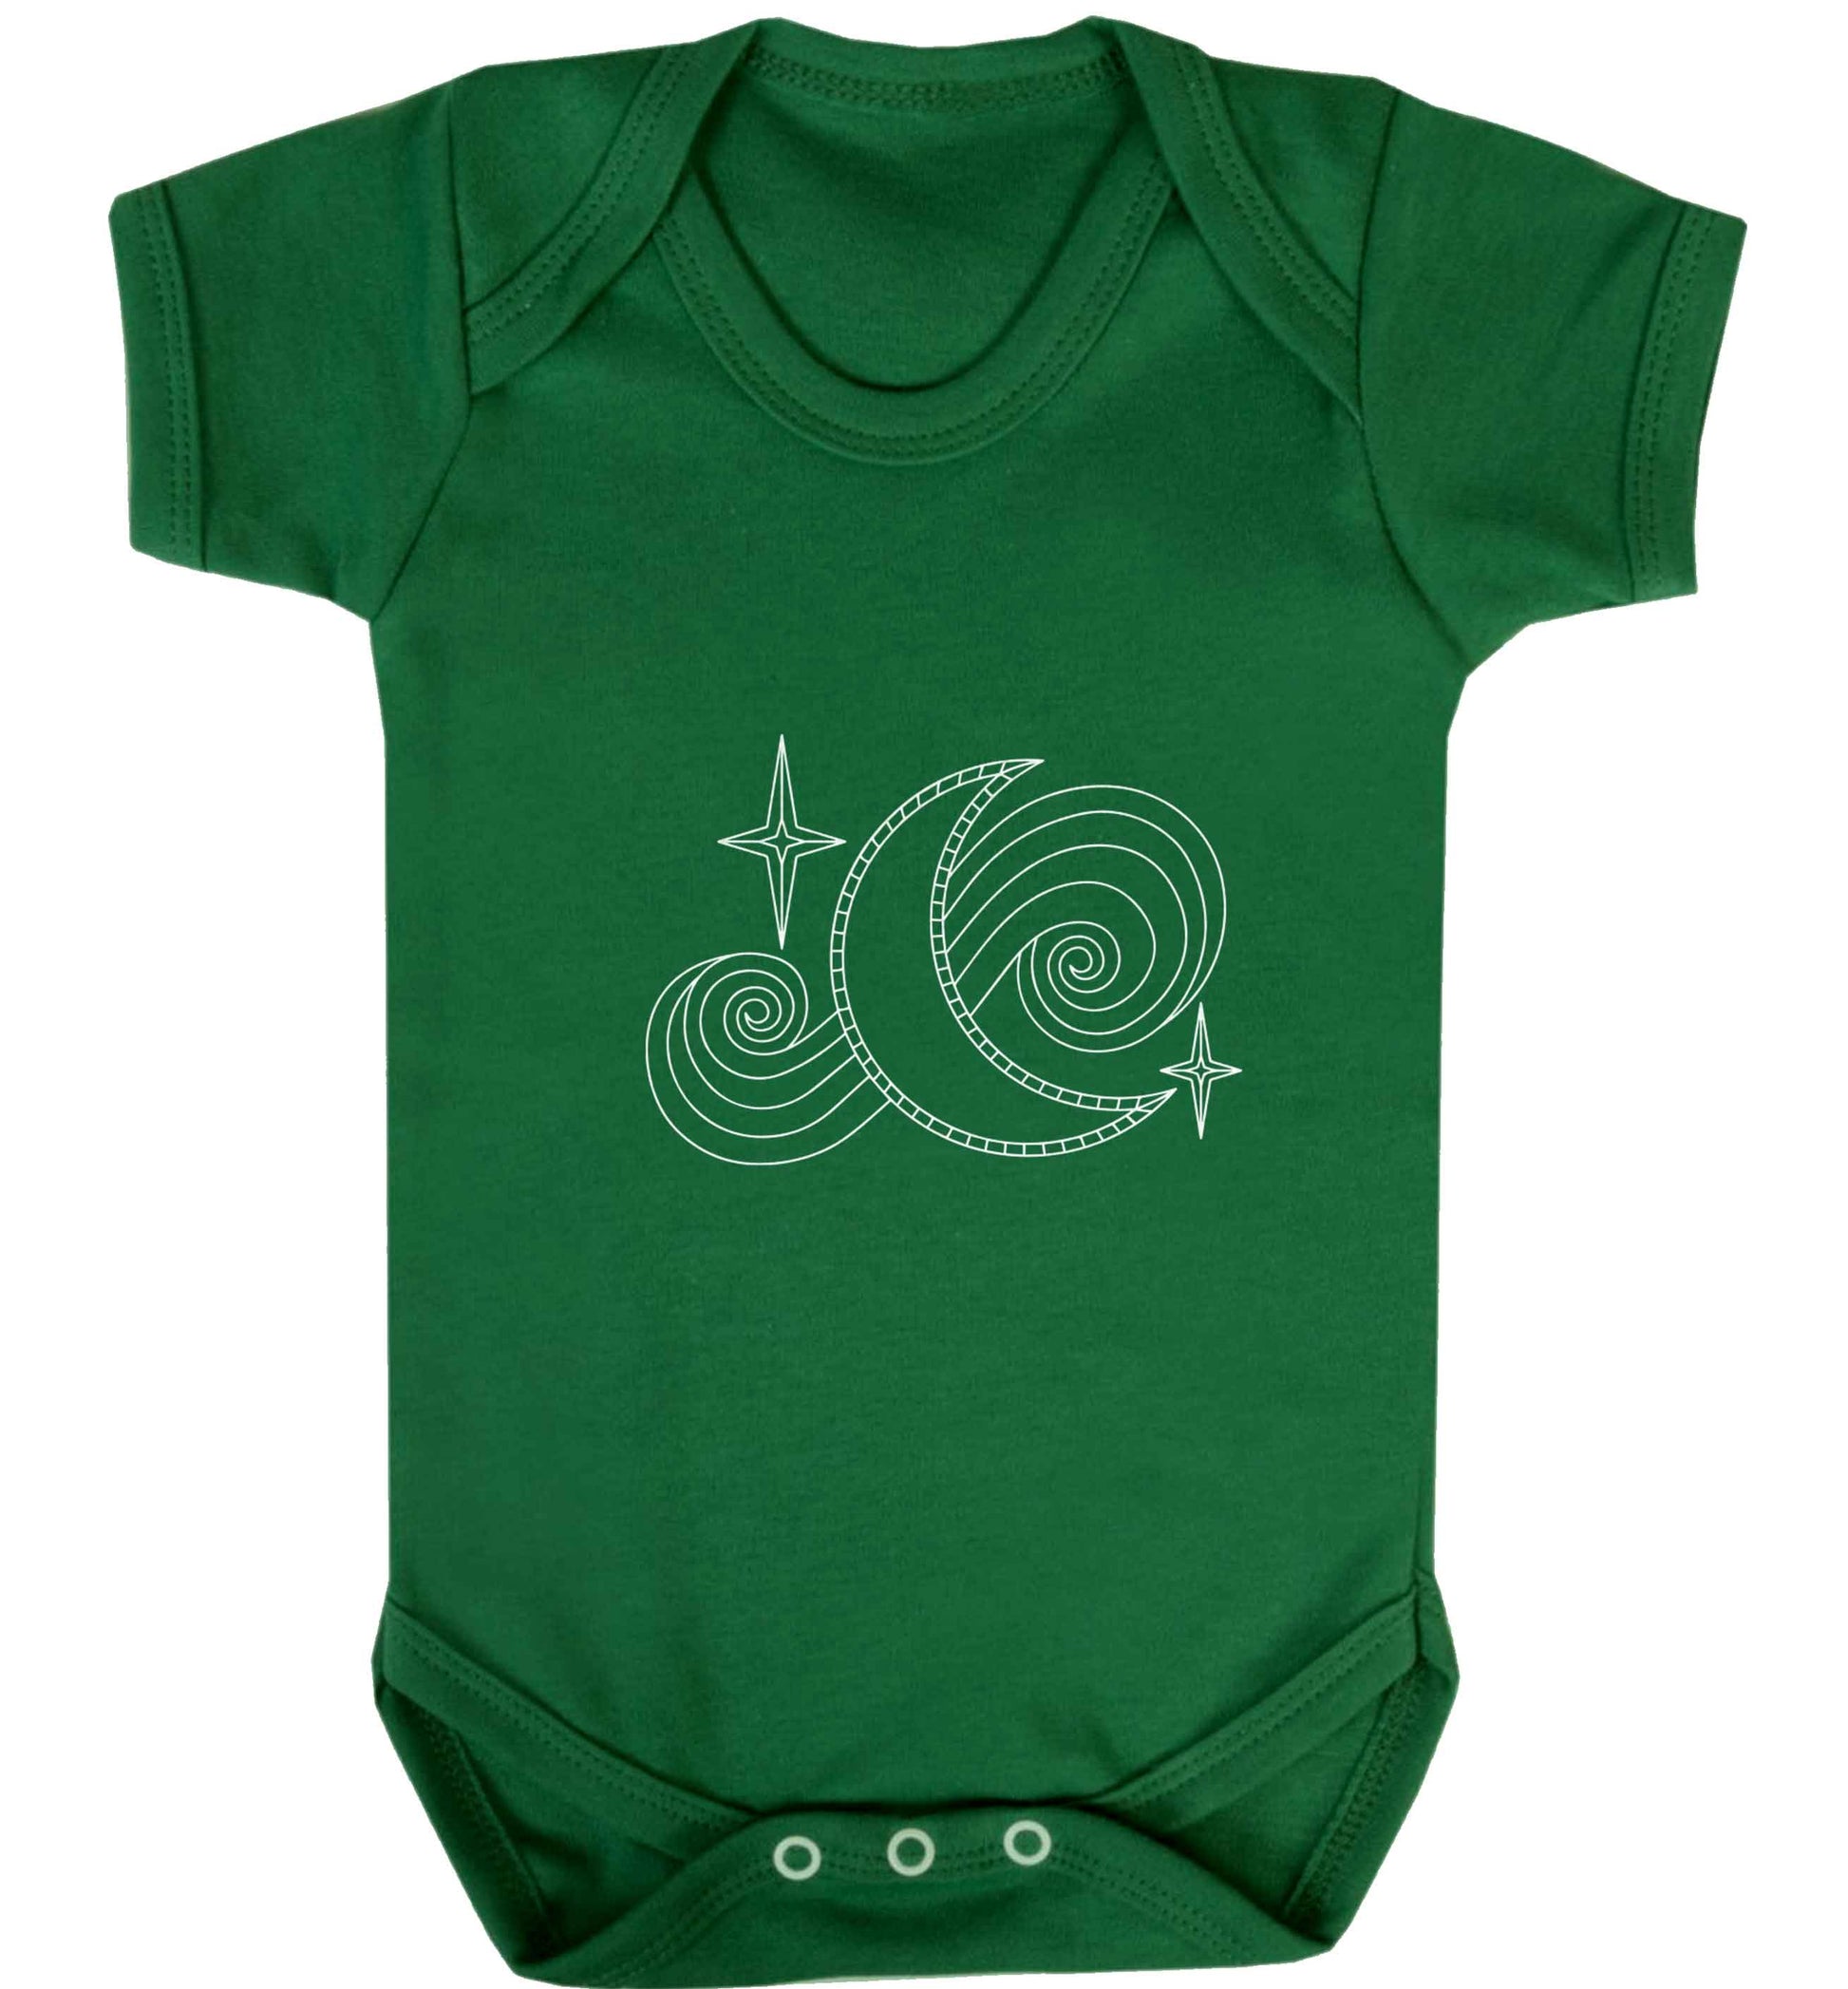 Moon and stars illustration baby vest green 18-24 months